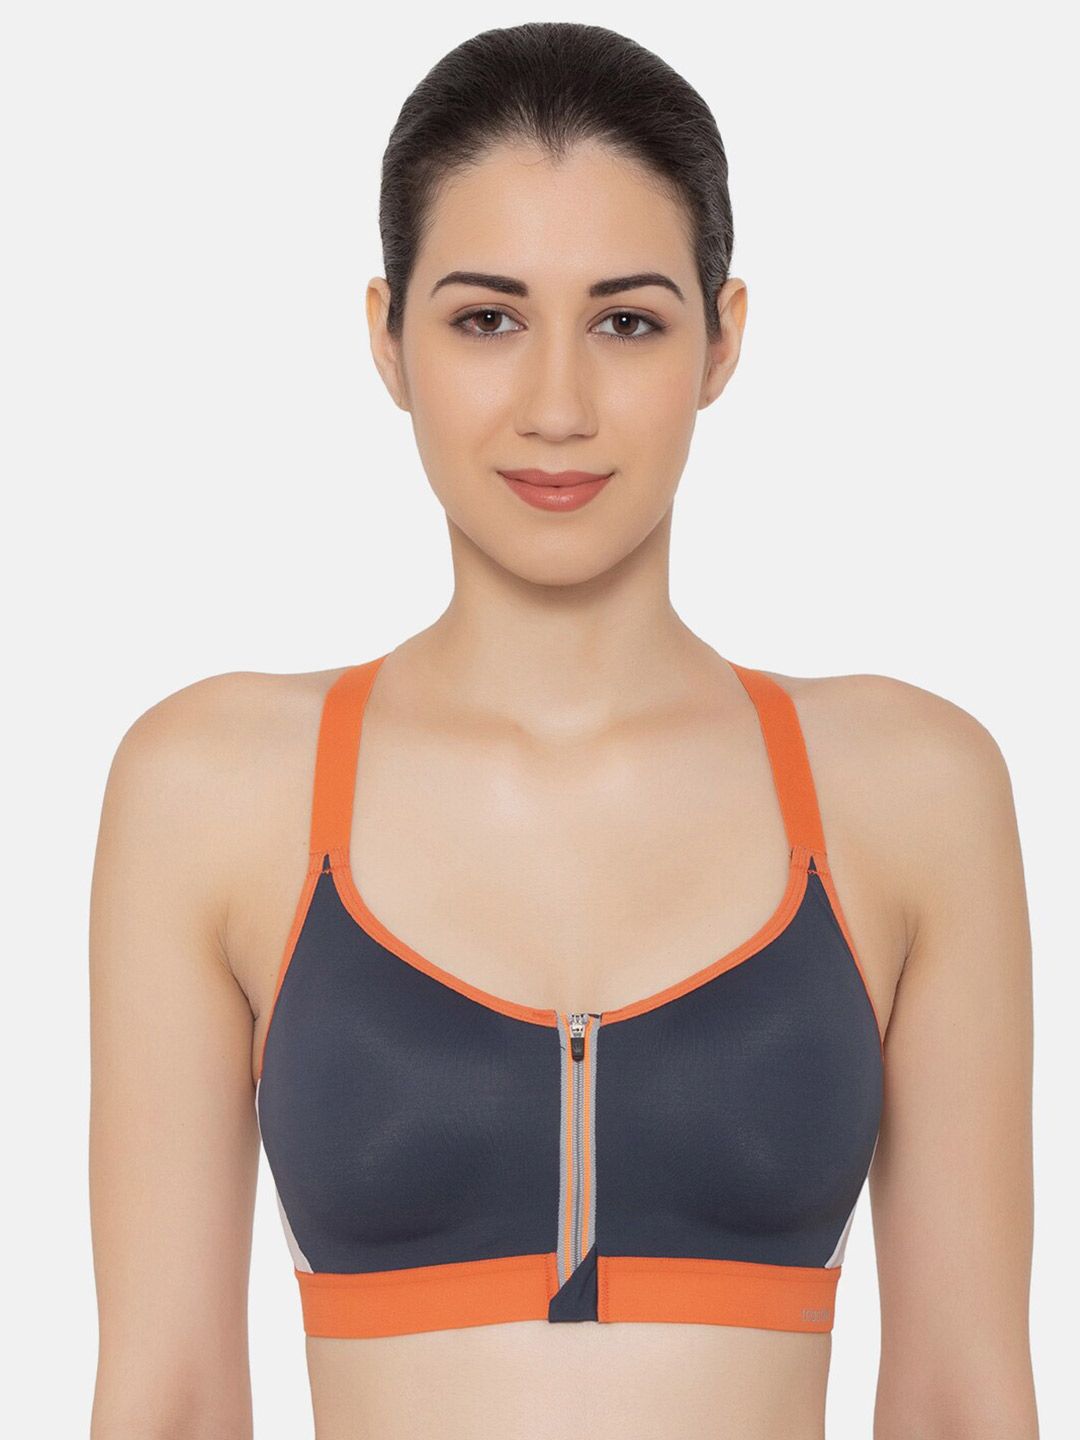 Triumph Triaction 125 Padded Wireless Front Open Extreme Bounce Control Sports Bra Price in India